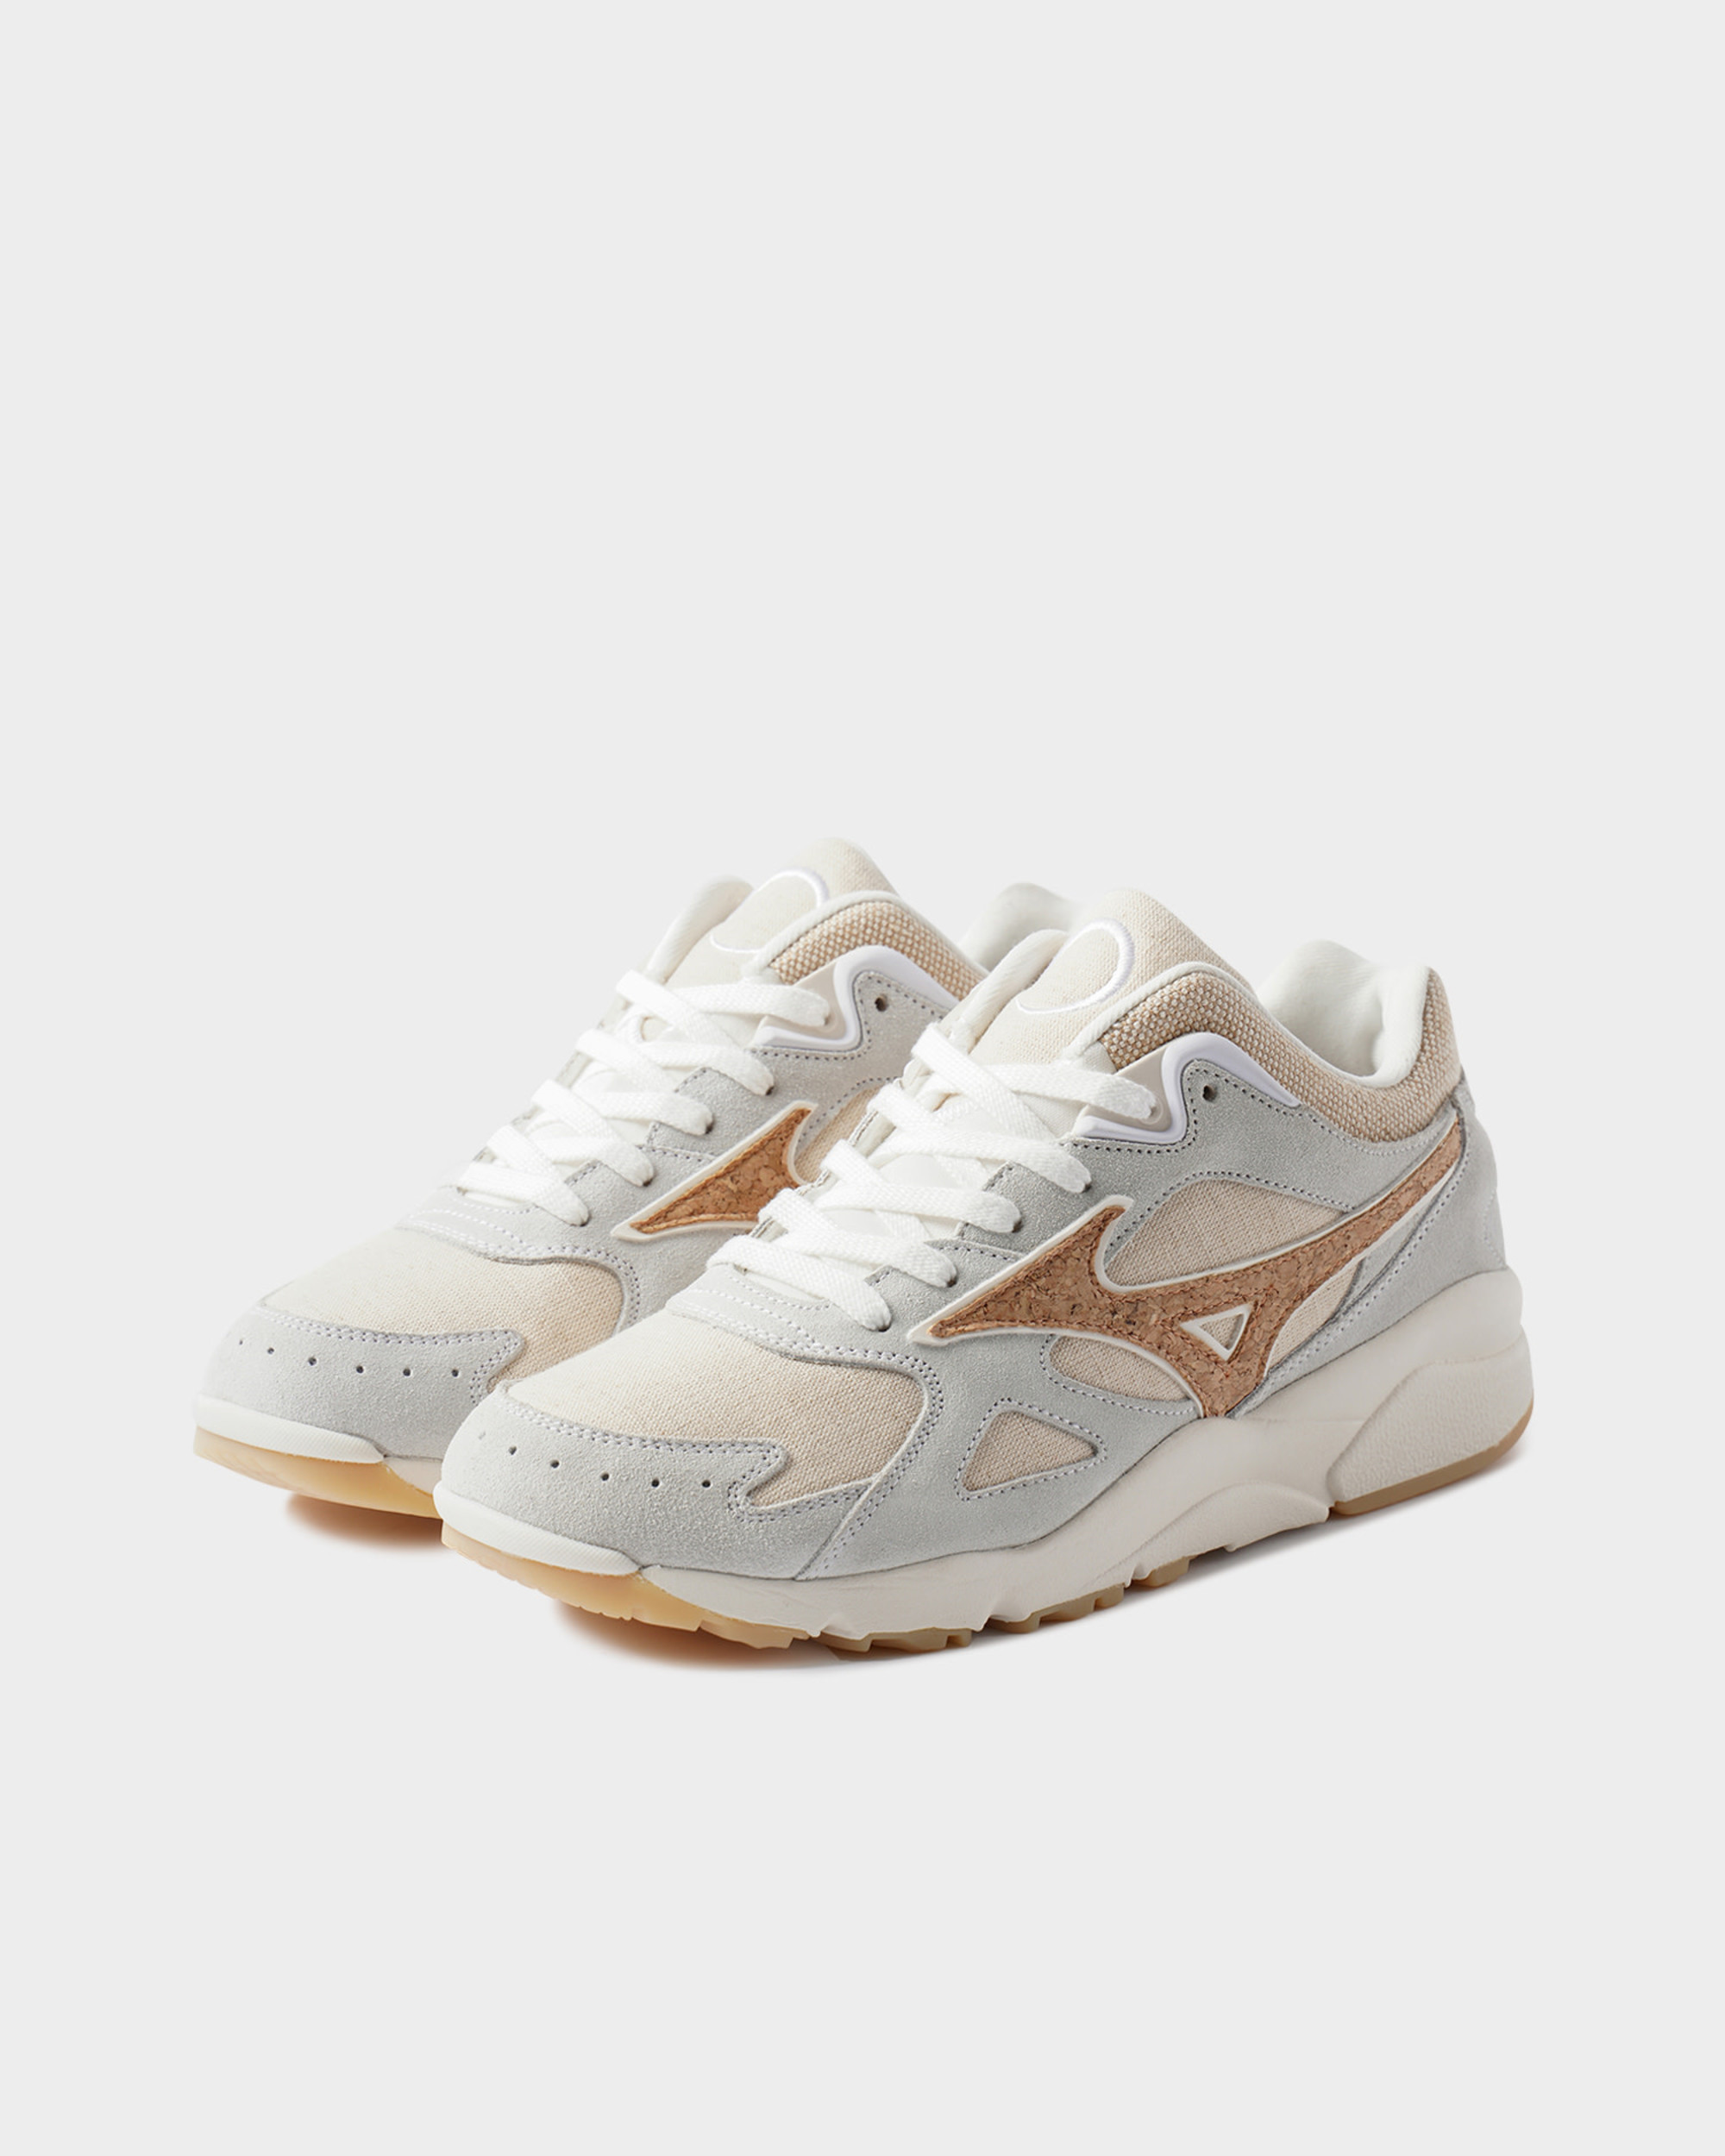 Mizuno Sky Medal Undyed white/ Ginger Root/ Undyed Root